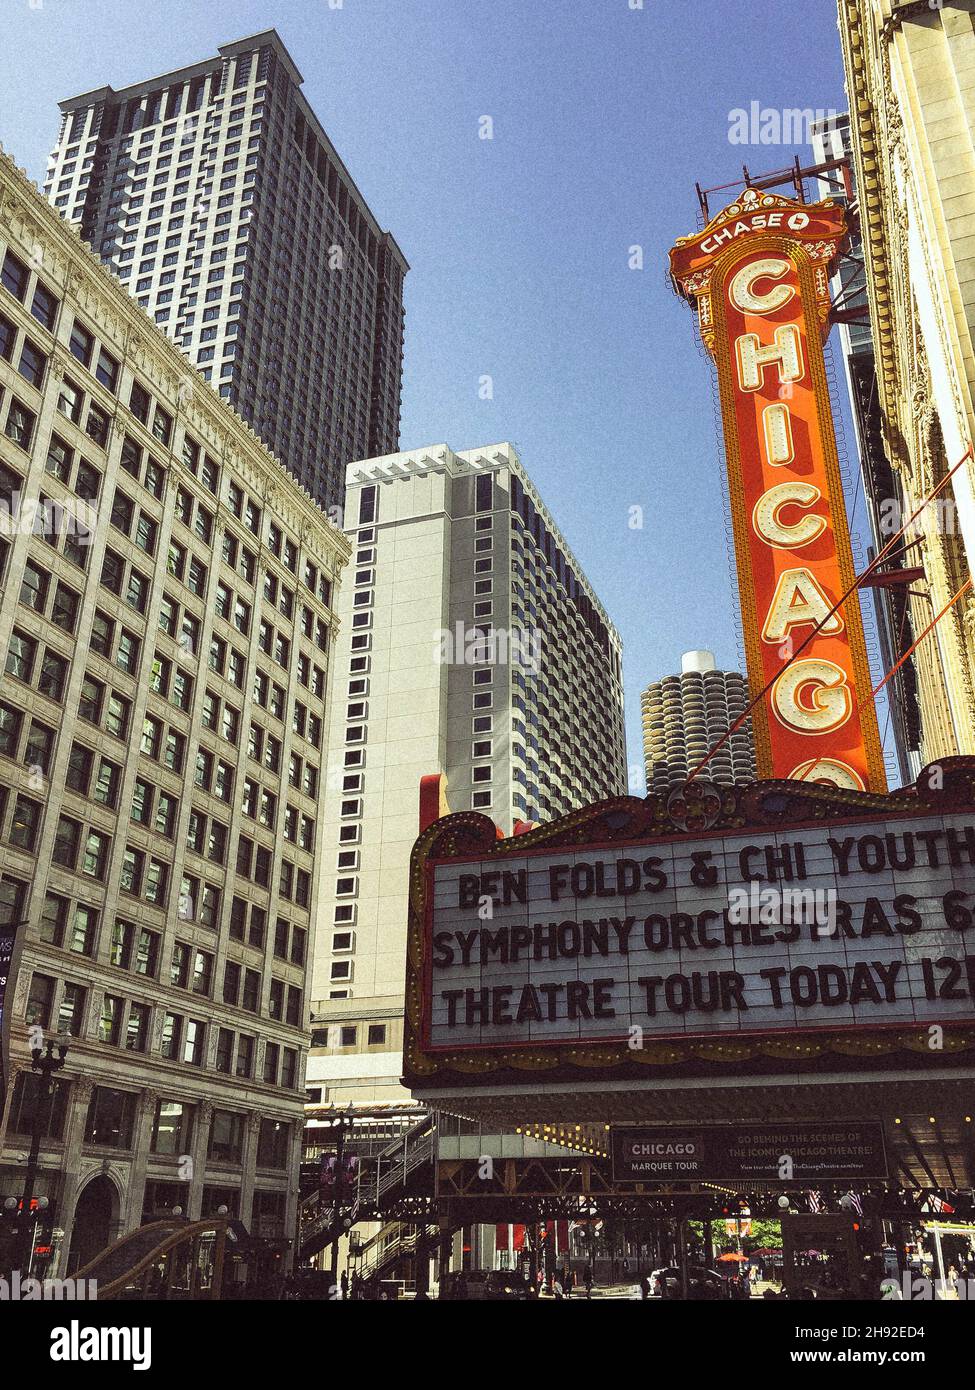 The Chicago Theatre, originally known as the Balaban and Katz Chicago Theatre, is a landmark theatre located on North State Street in the Loop area. Stock Photo